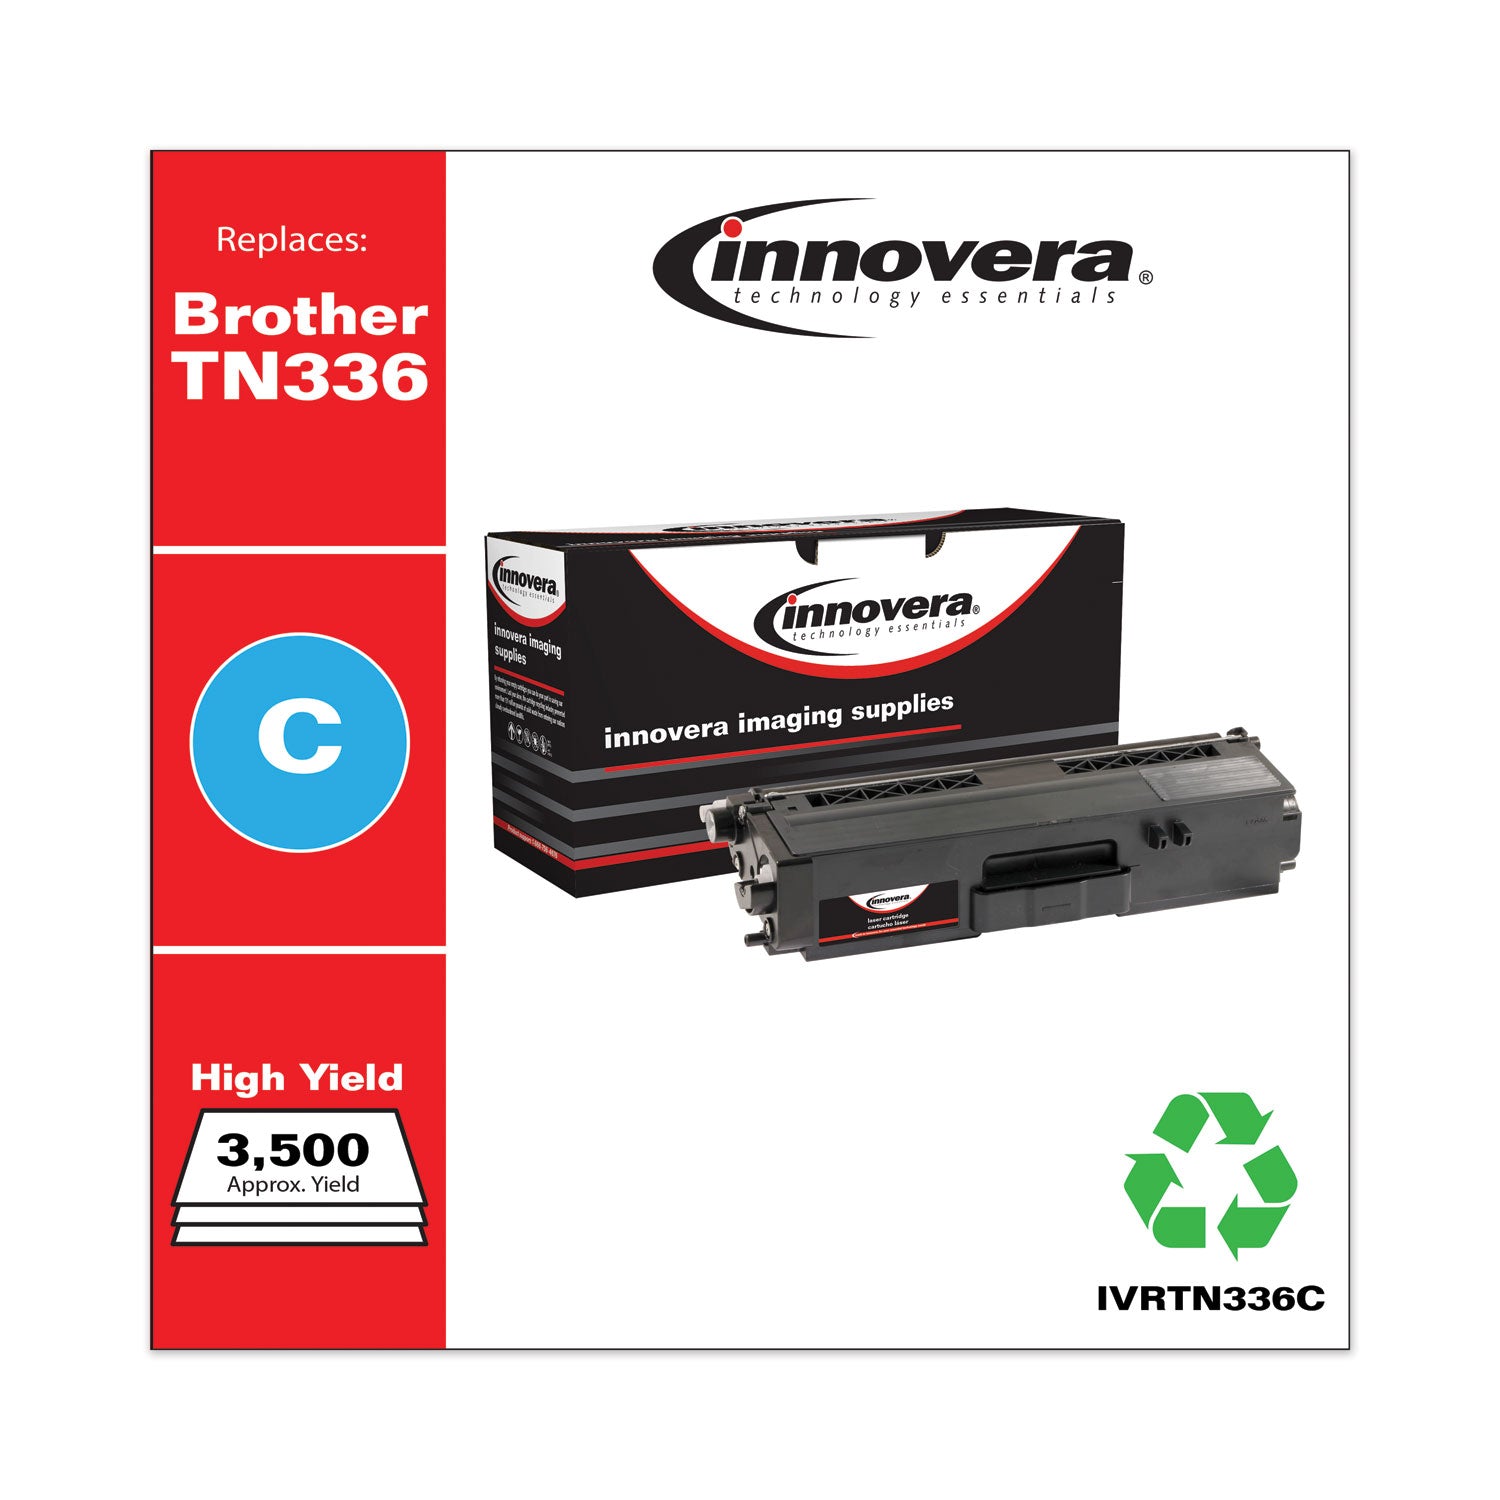 remanufactured-cyan-high-yield-toner-replacement-for-tn336c-3500-page-yield-ships-in-1-3-business-days_ivrtn336c - 2